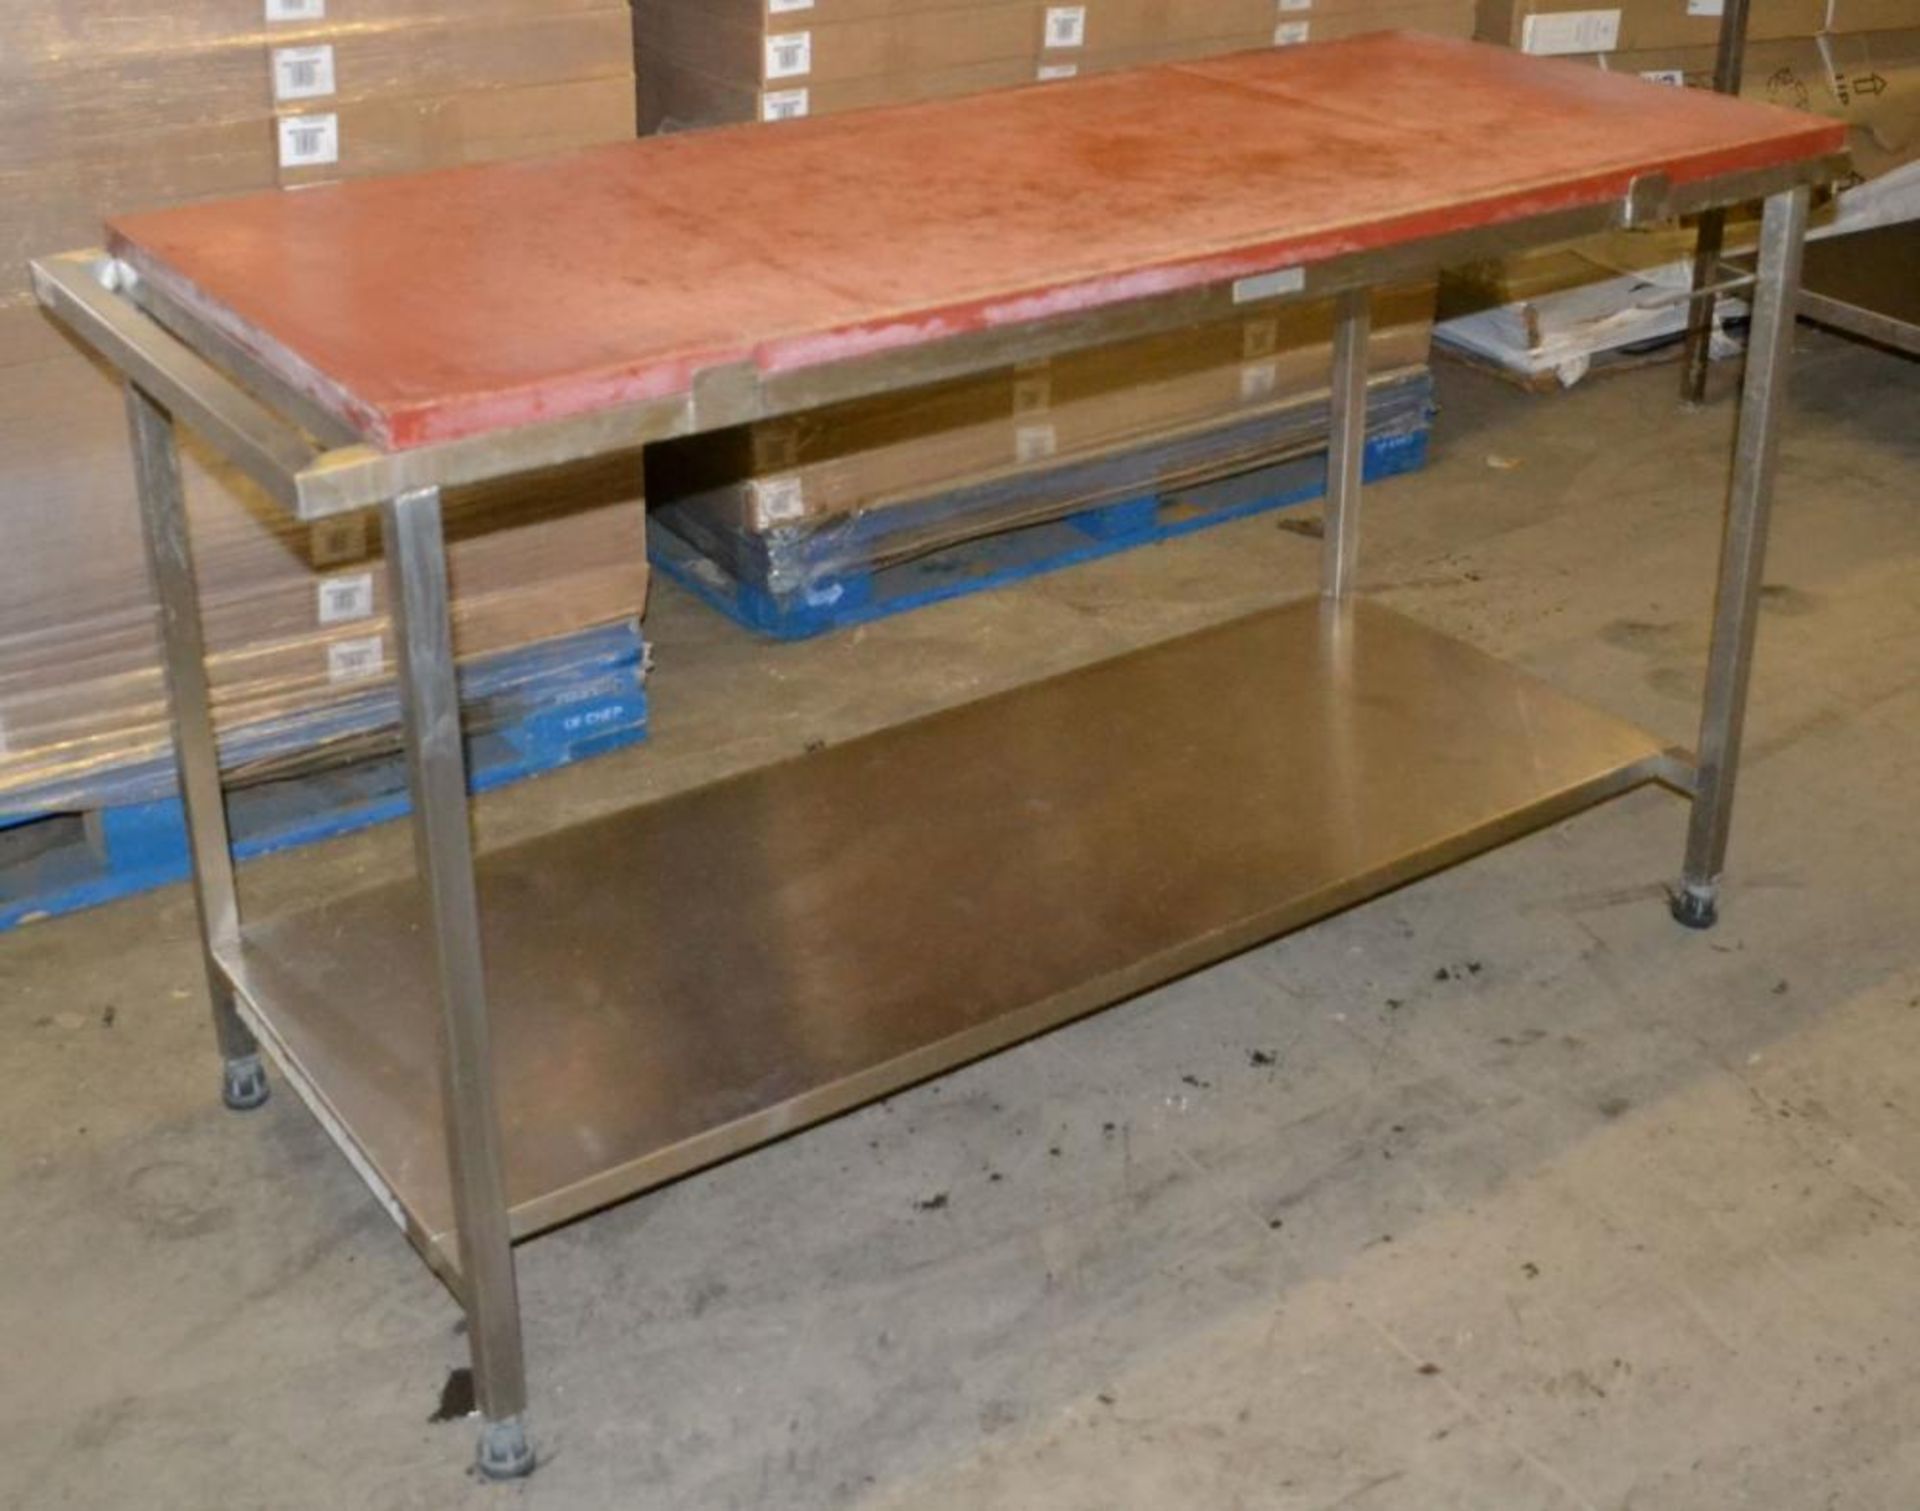 1 x Stainless Steel Poly Top Cutting / Prep Table - Dimensions: 153.5 x 71 x 86cm - Ref: MC132 -